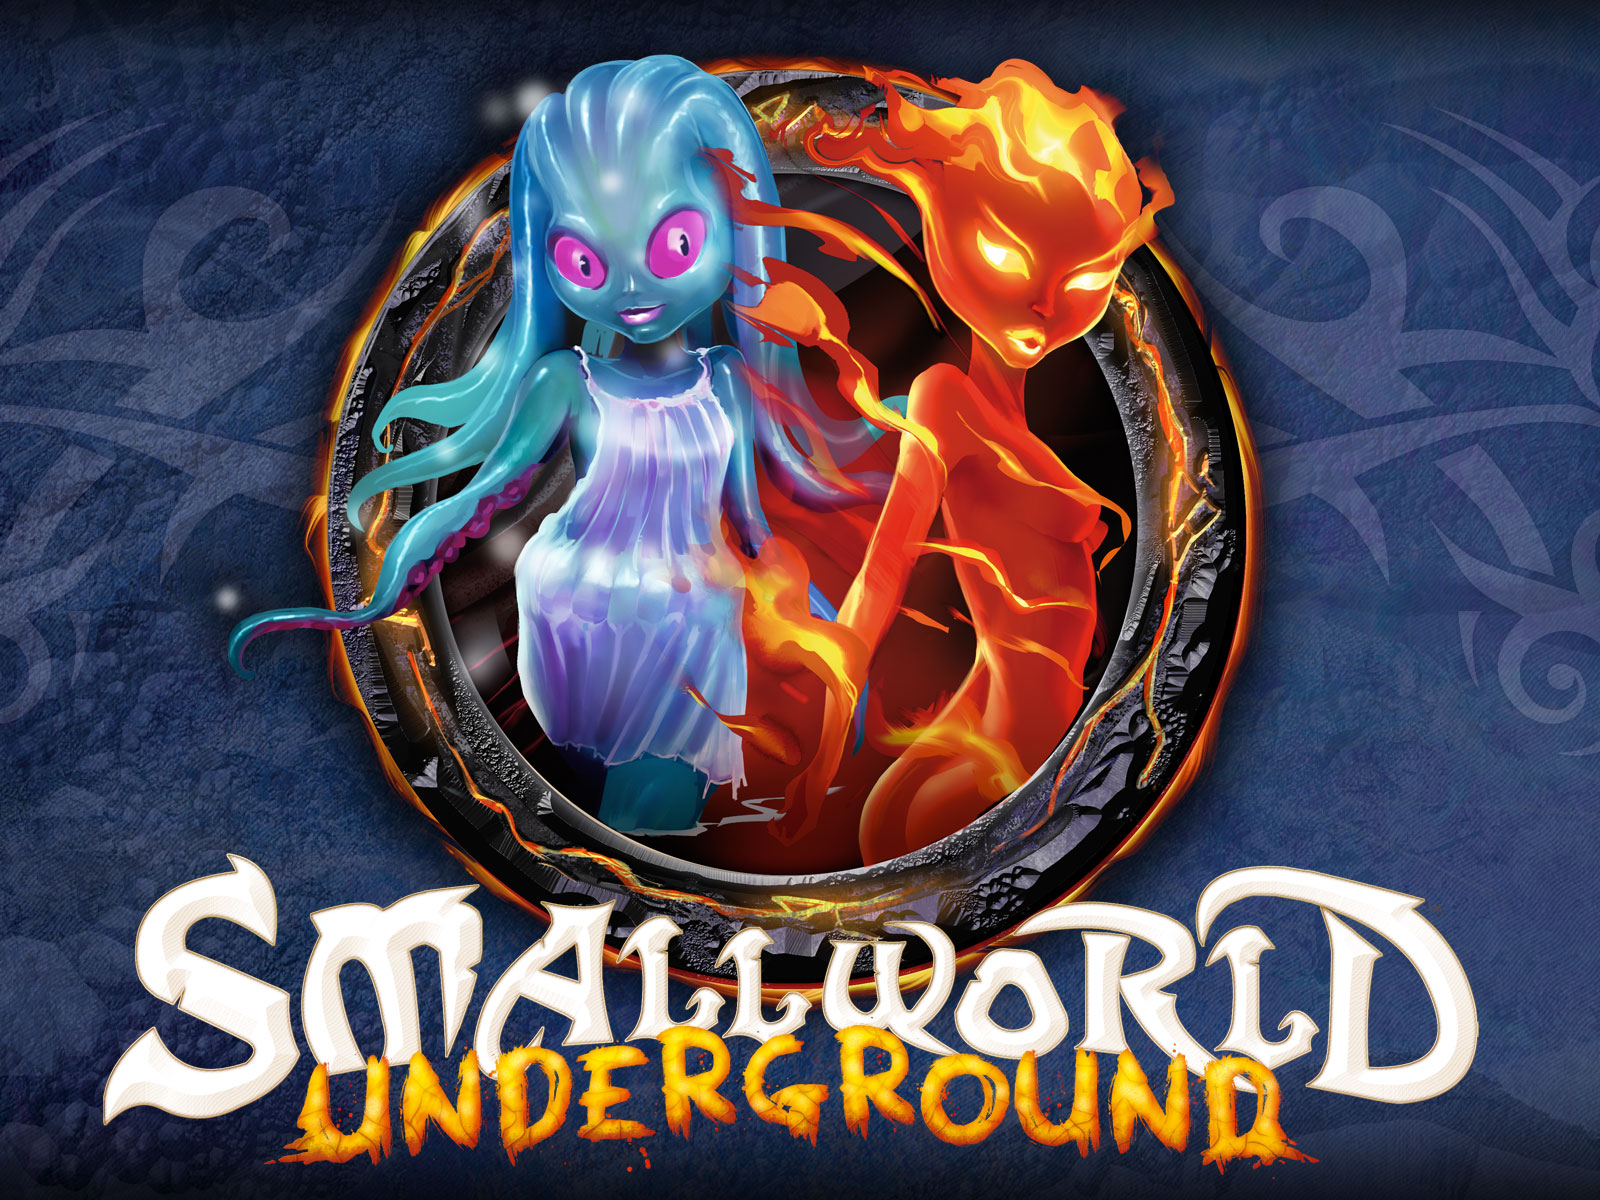 Image result for small world underground races